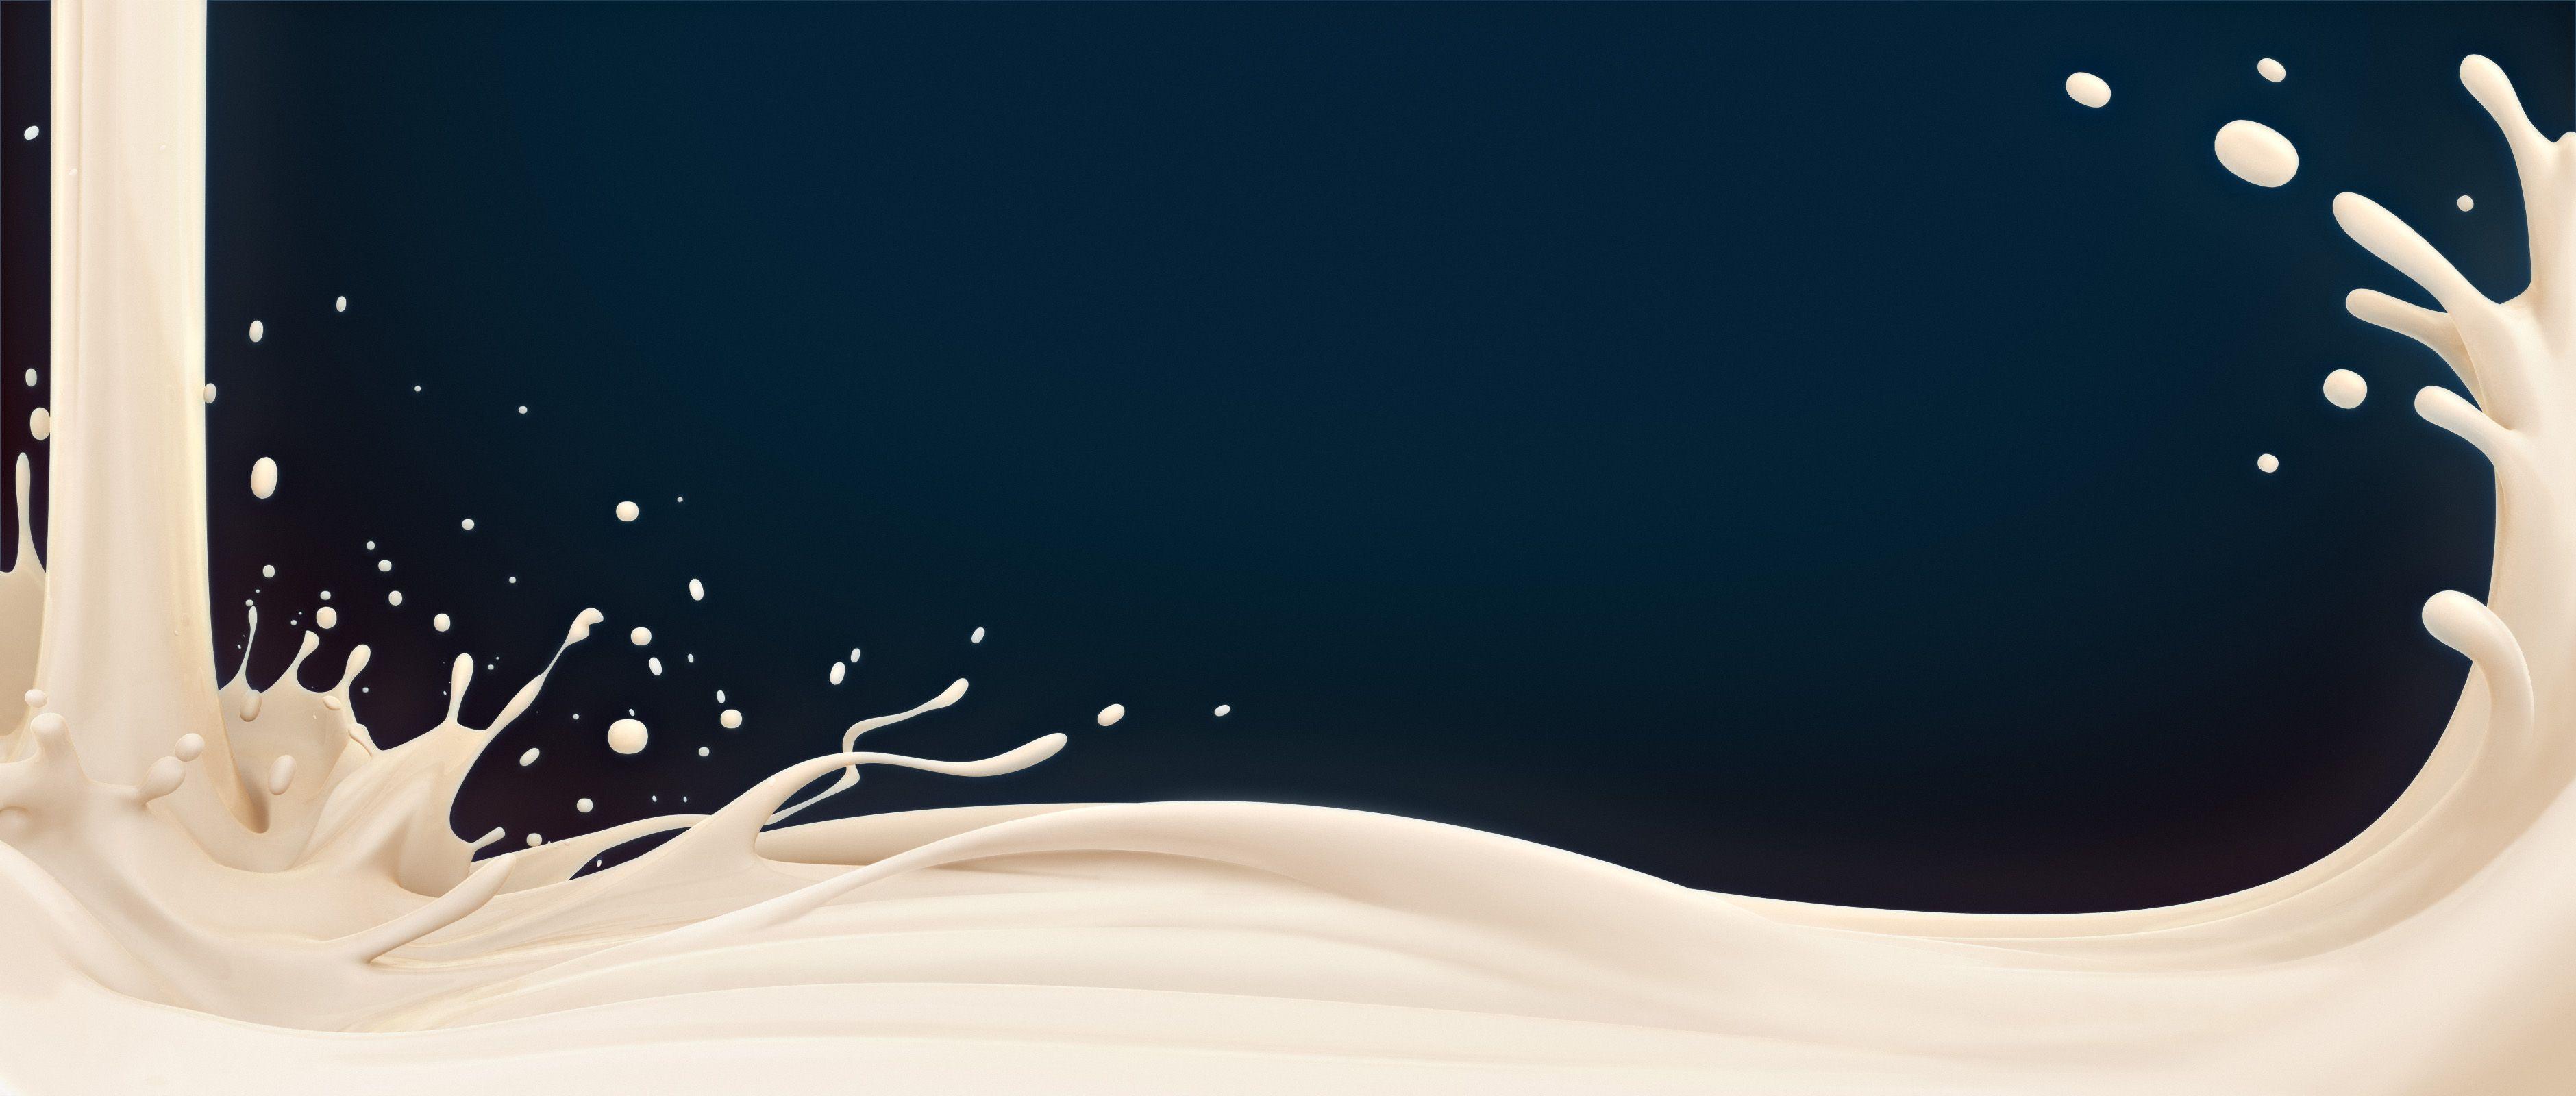 Best Milk Wallpaper, Wide Full HD Image Collection